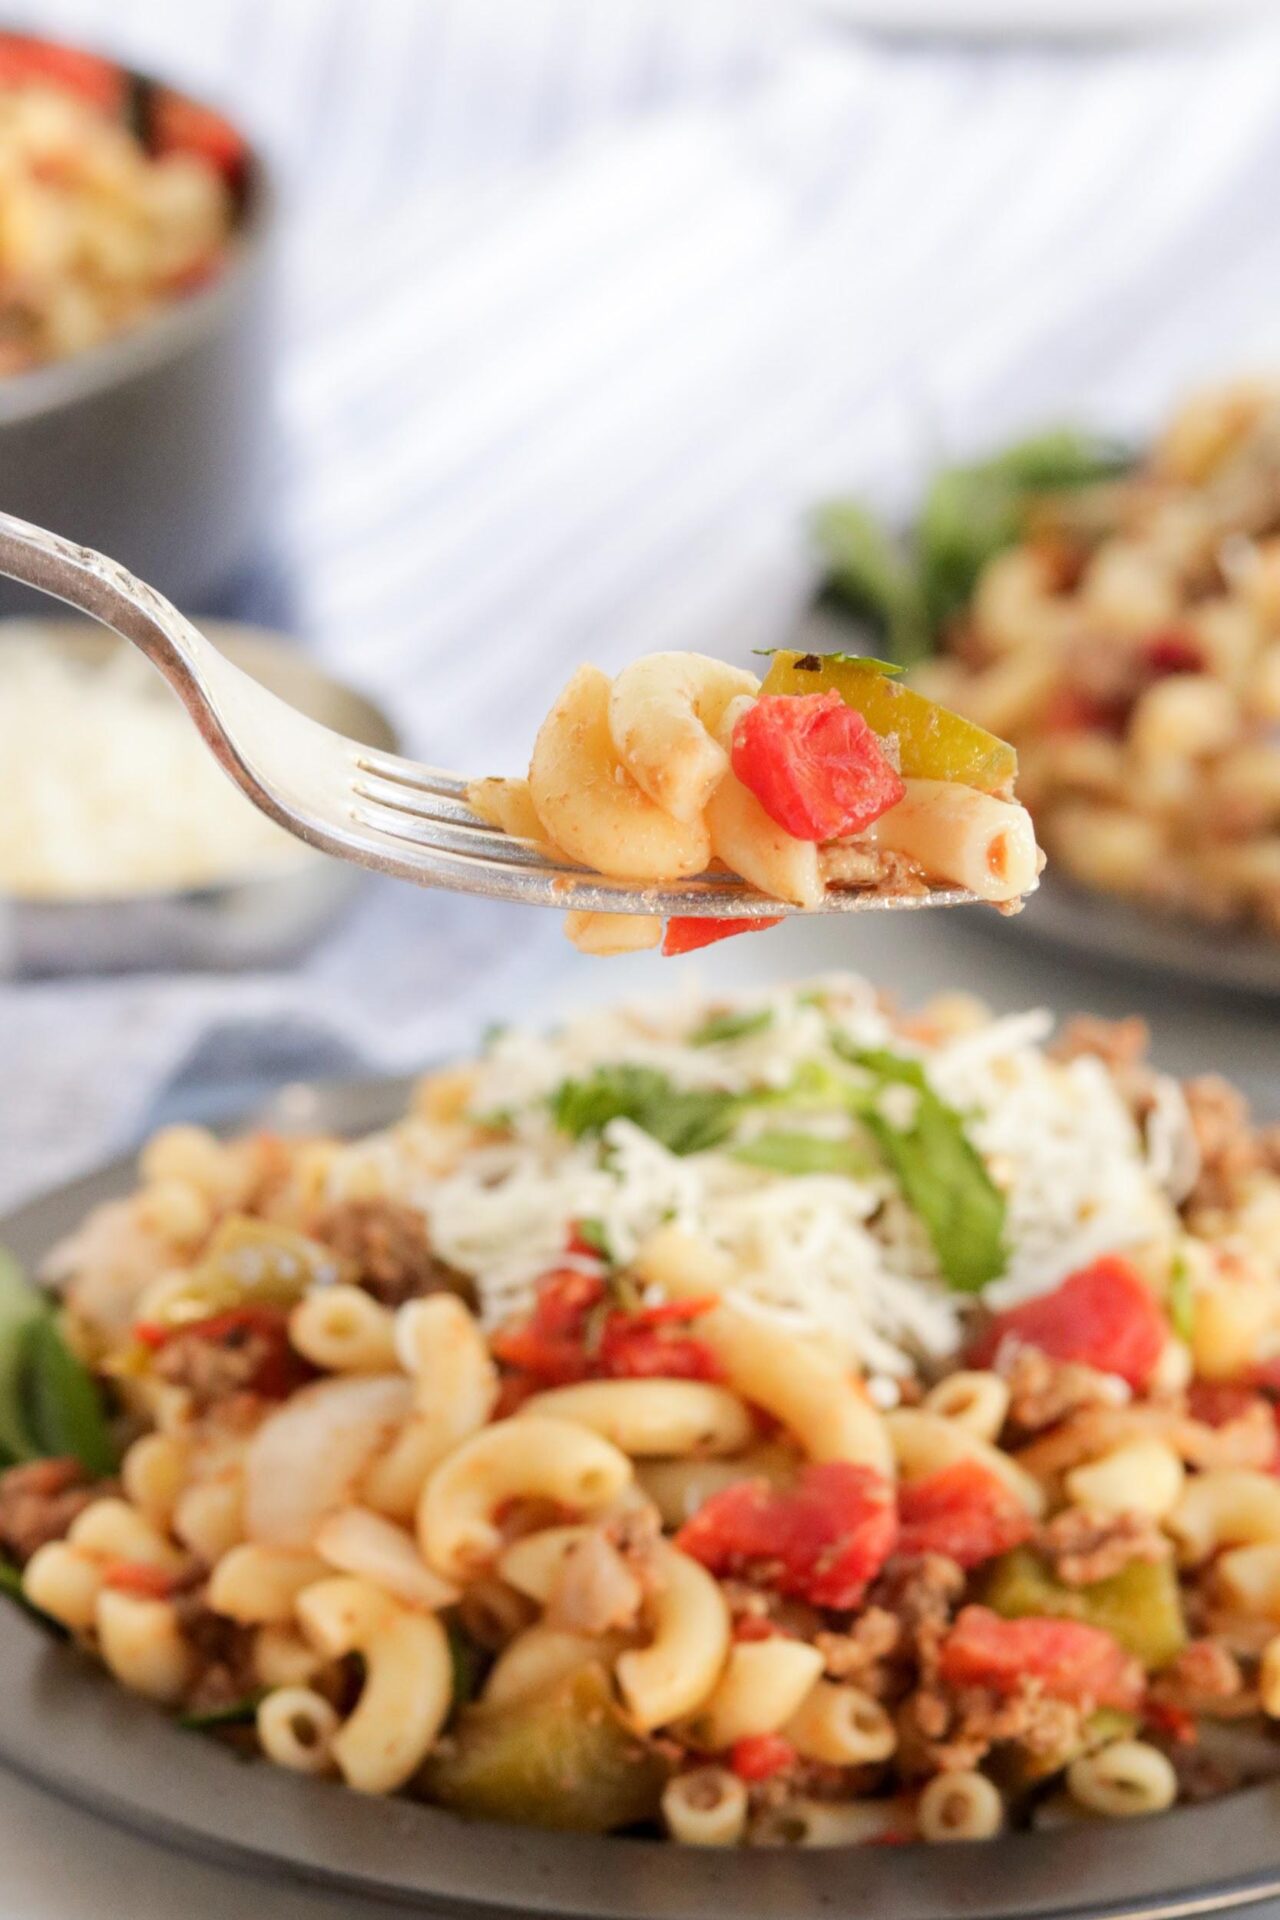 Are you looking for the perfect comfort food? Well, look no further because this American Chop Suey Recipe is the perfect meal for busy families!